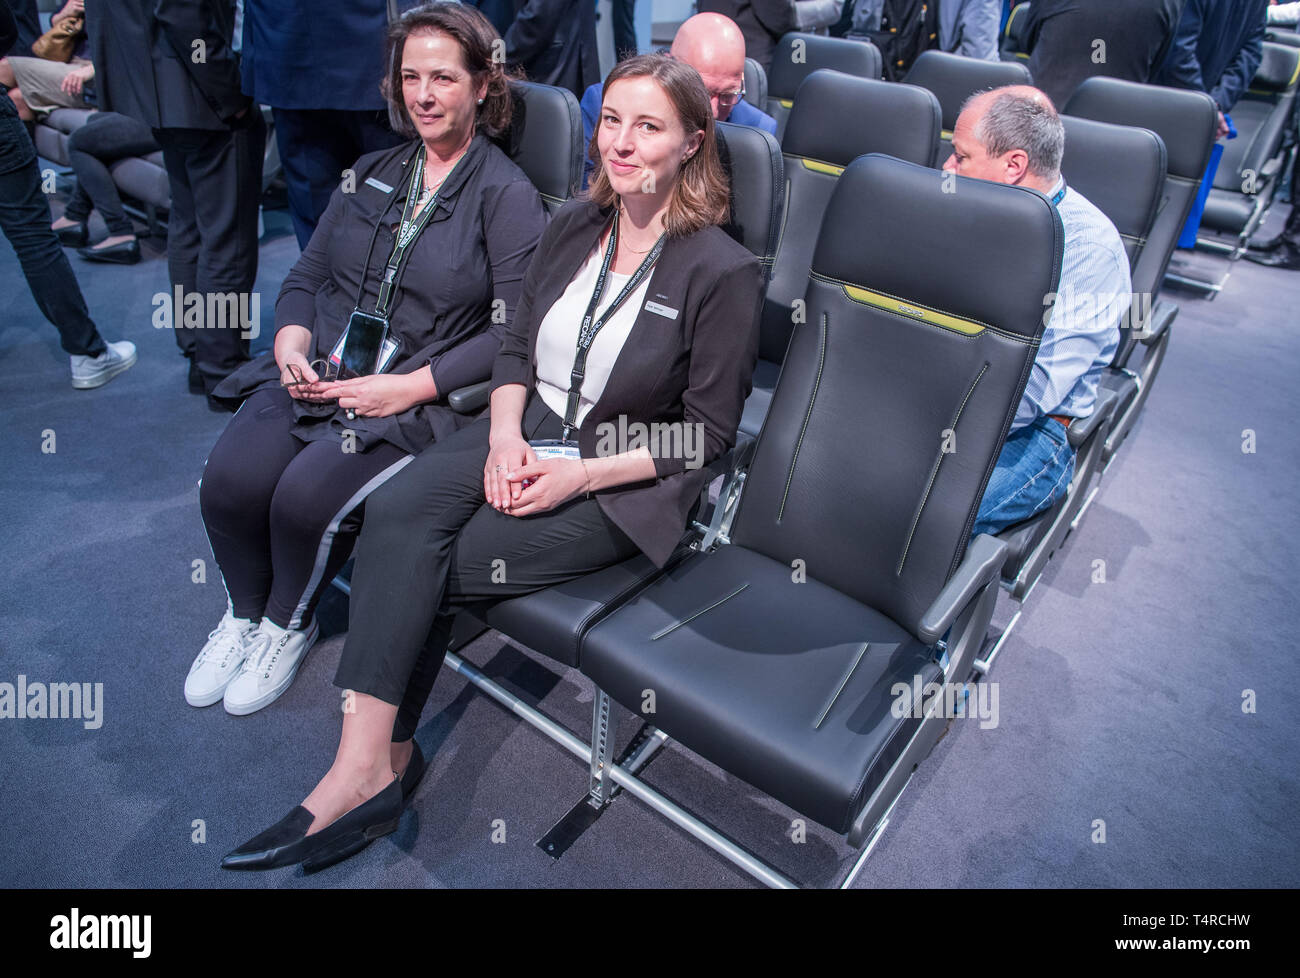 Hamburg, Germany. 03rd Apr, 2019. The booth of the manufacturer of aircraft  seats Recaro ZIM Air Seat at the Aircraft Interiors Expo. More than 500  exhibitors present news and innovations for the